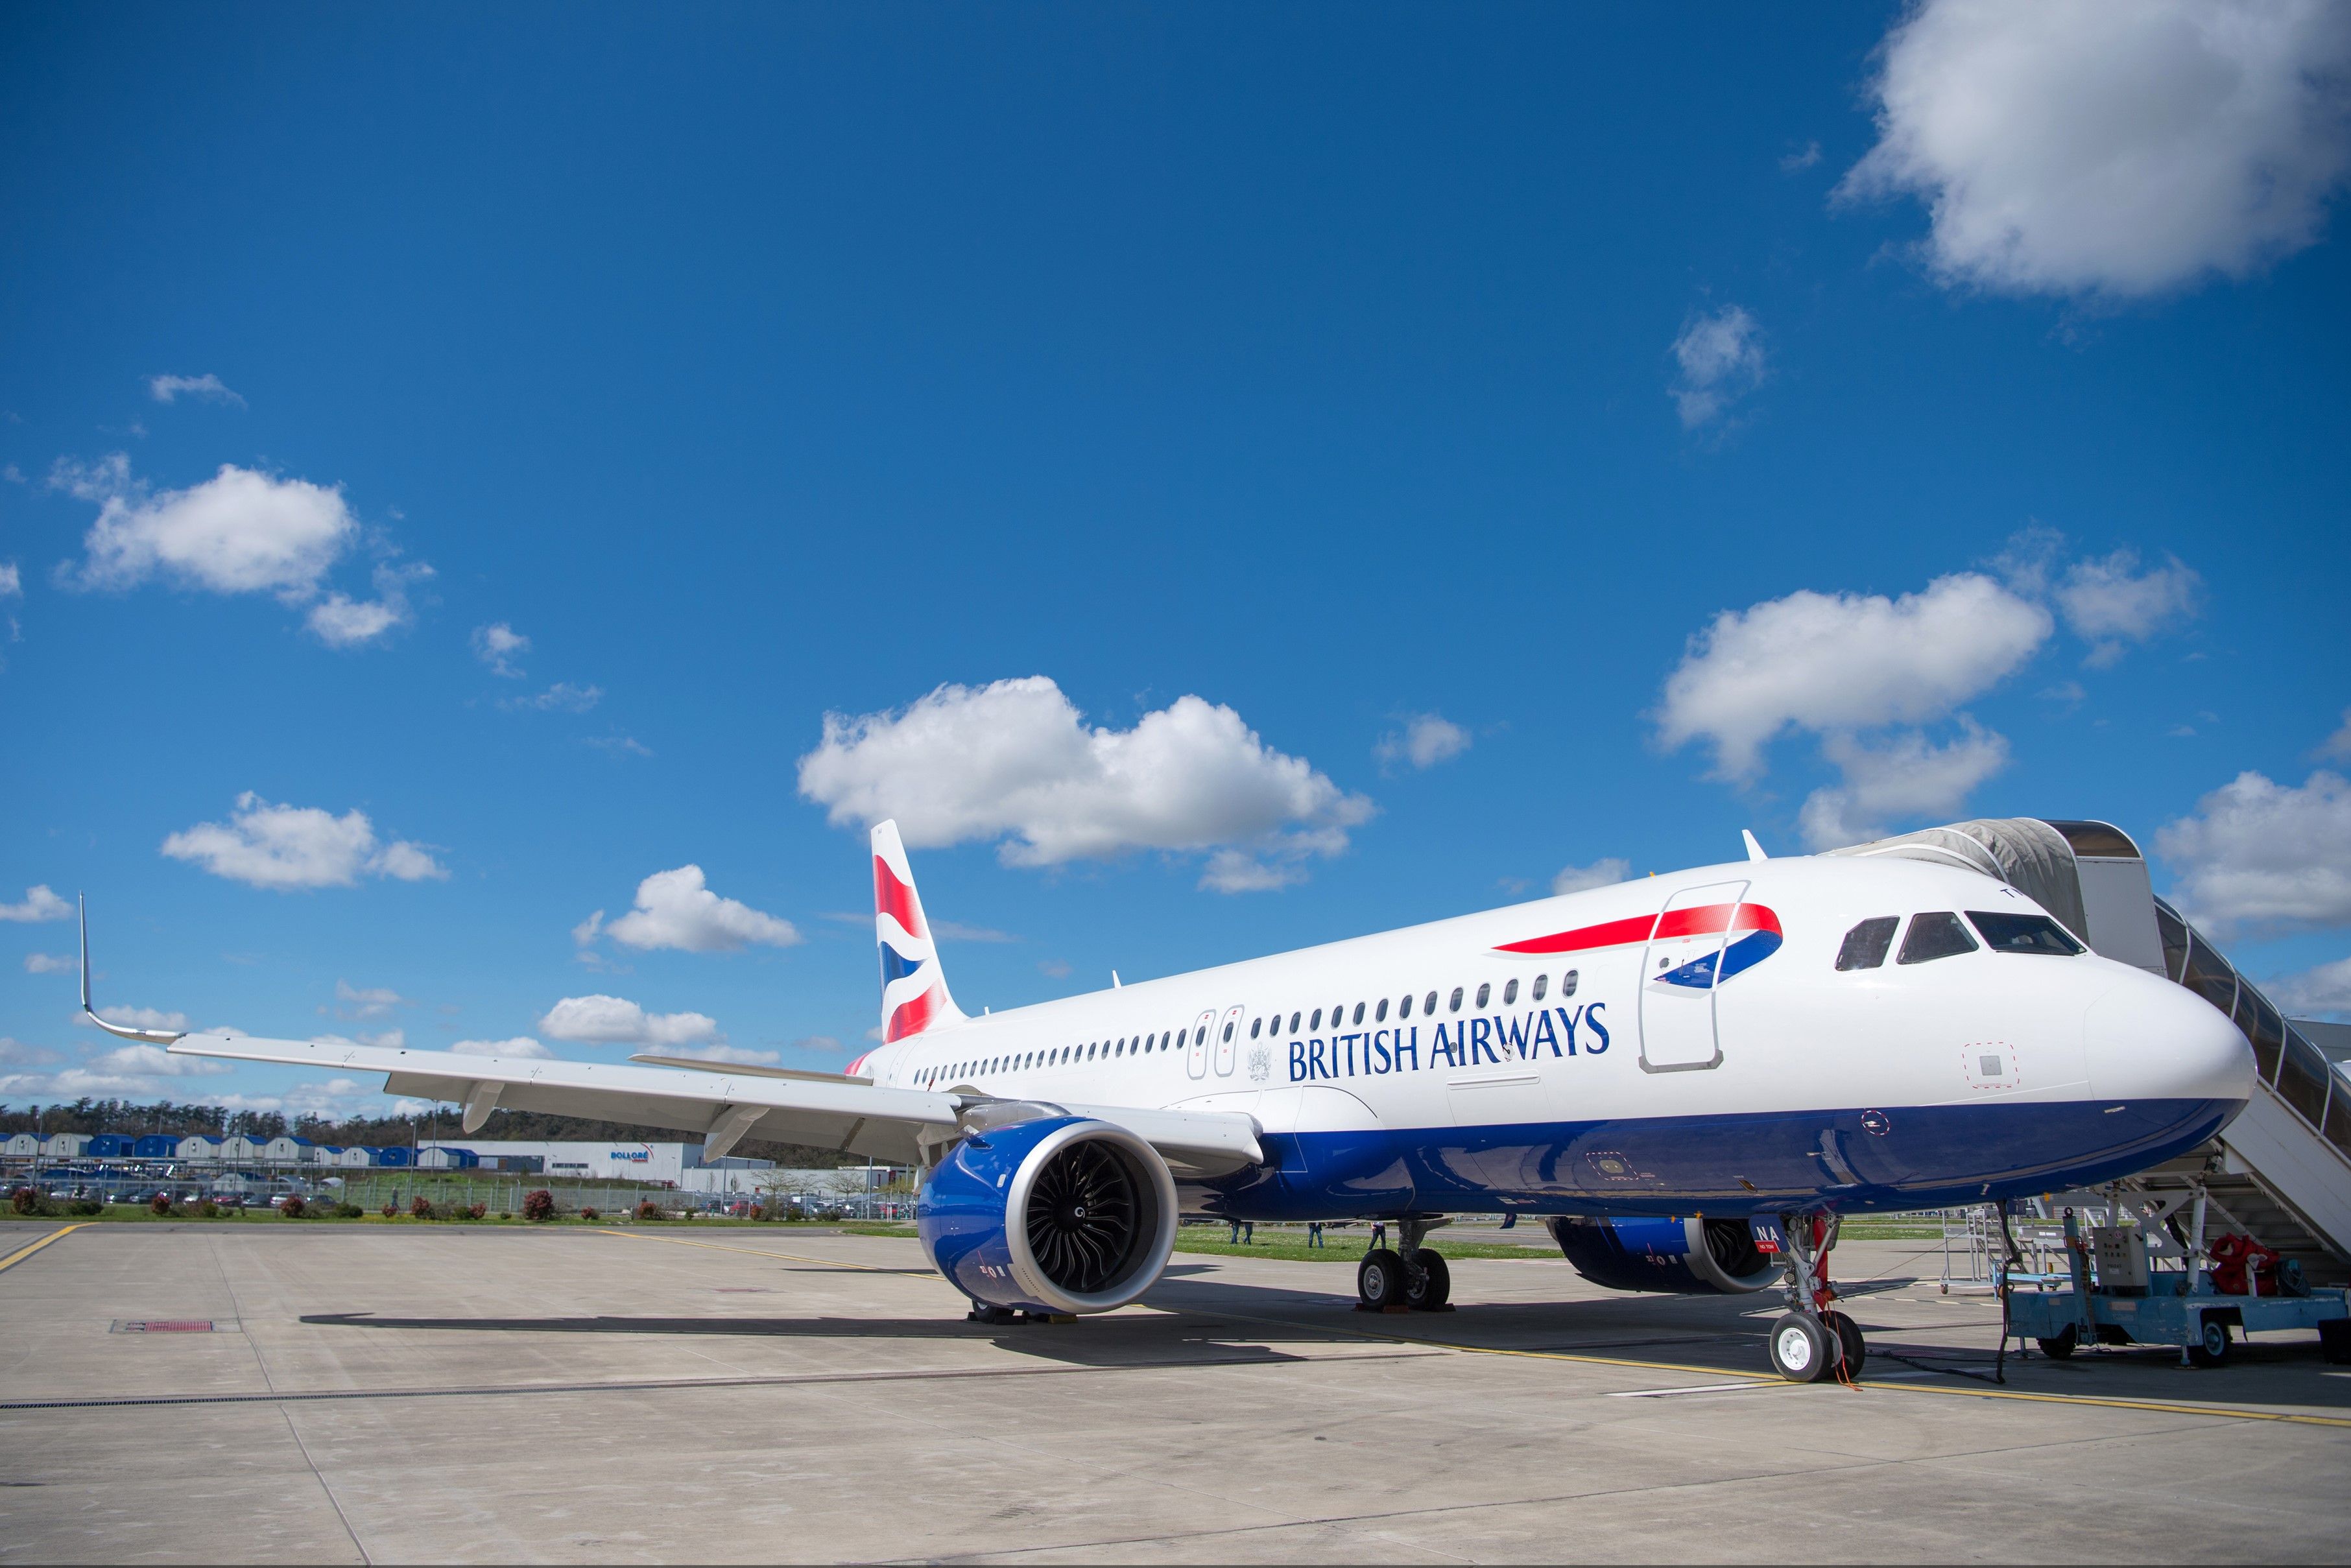 British Airways Adds 4 More Short-Haul Routes From London Heathrow